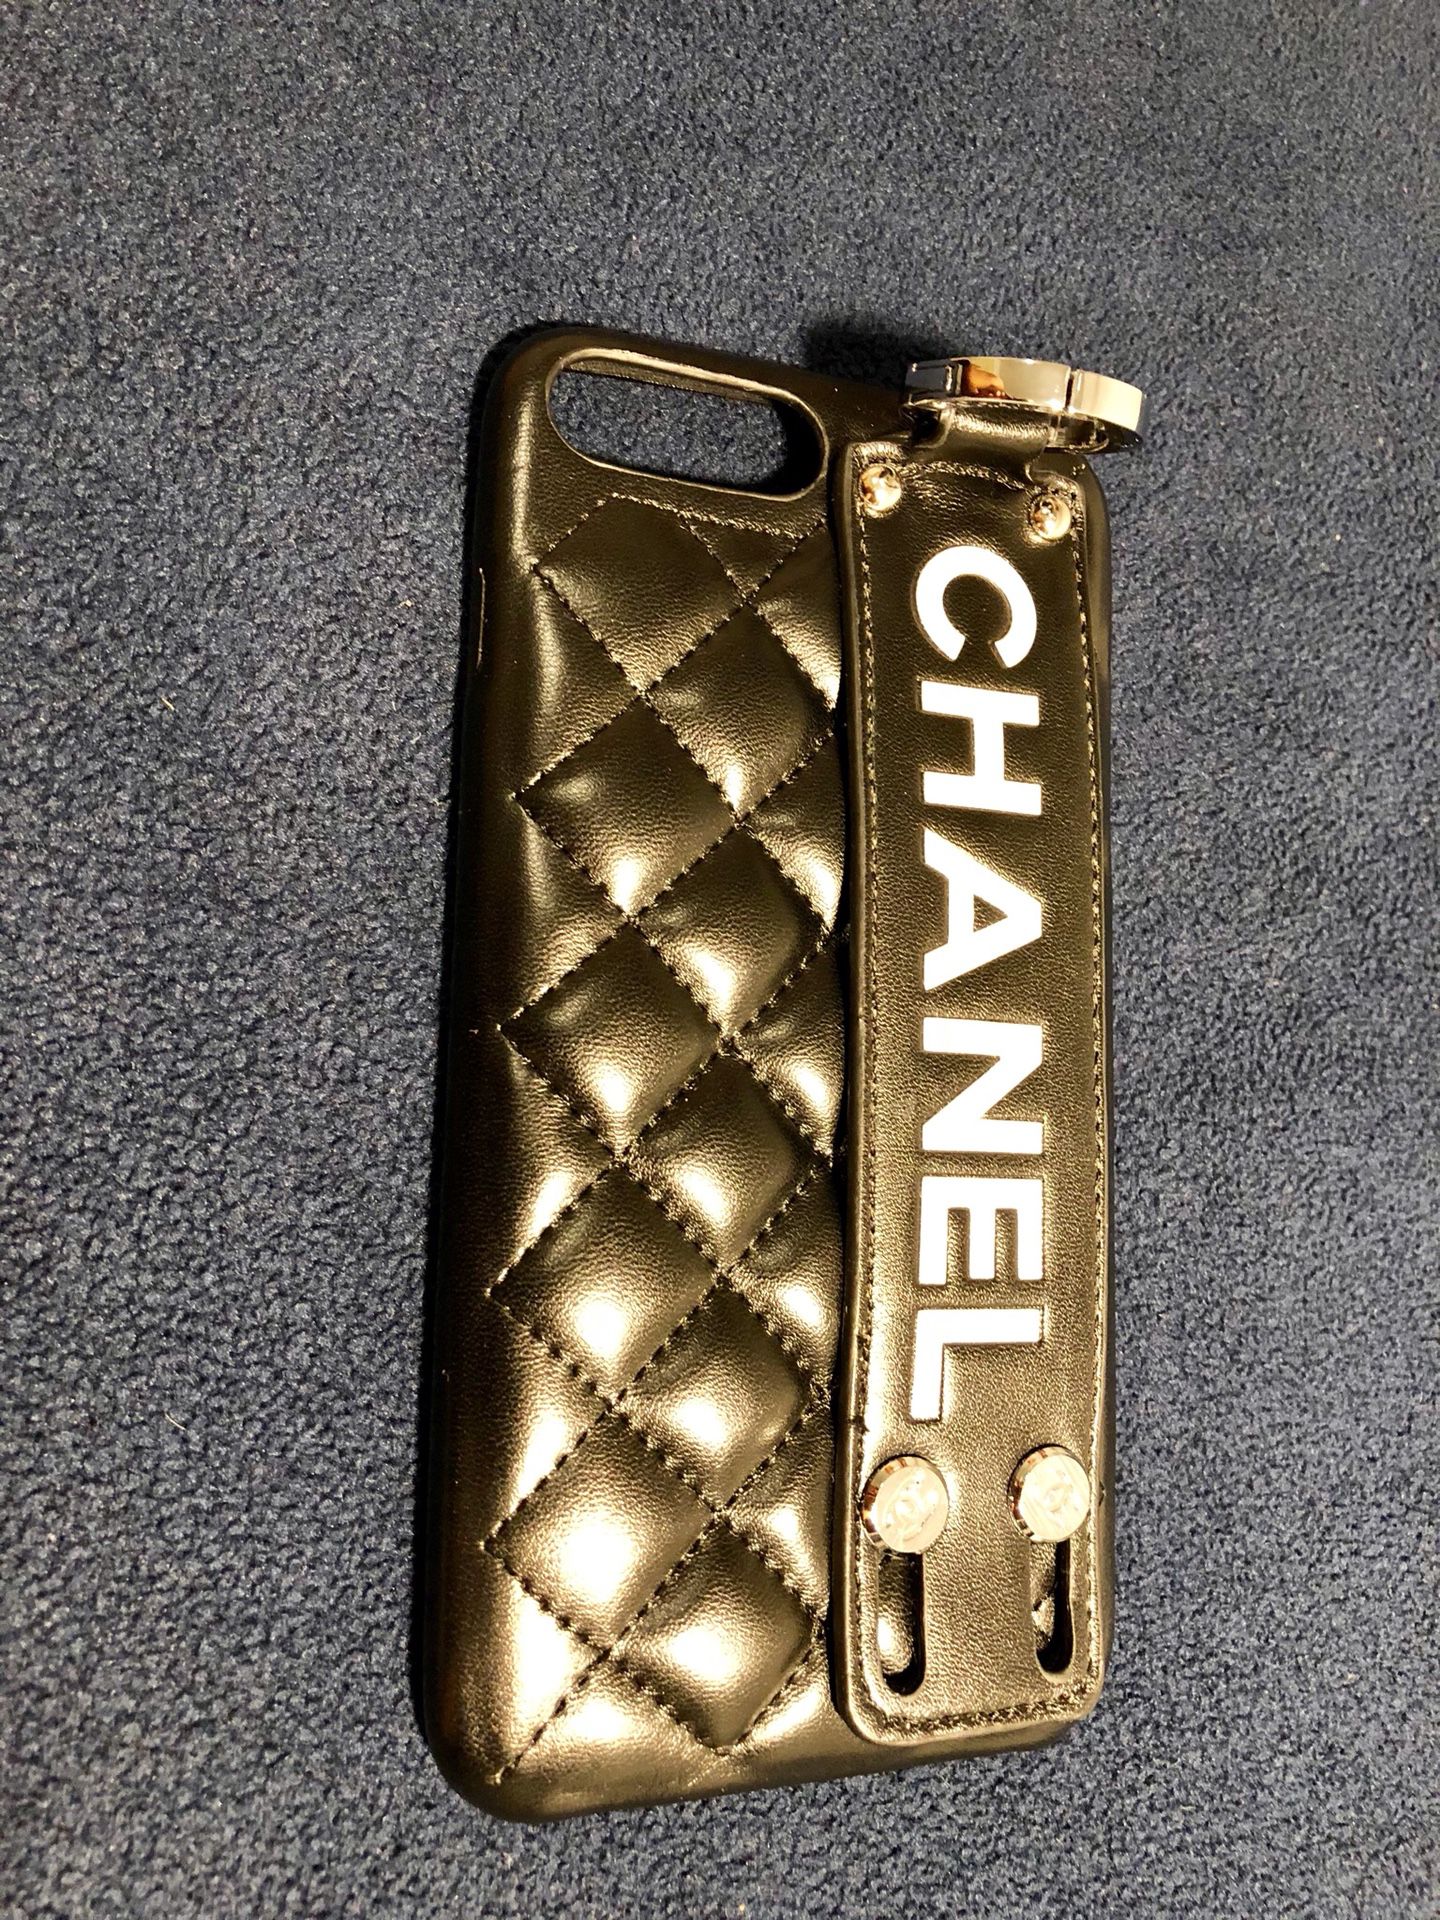 Chanel iPhone phone case iPhone 7/8 Plus for Sale in Wildomar, CA - OfferUp